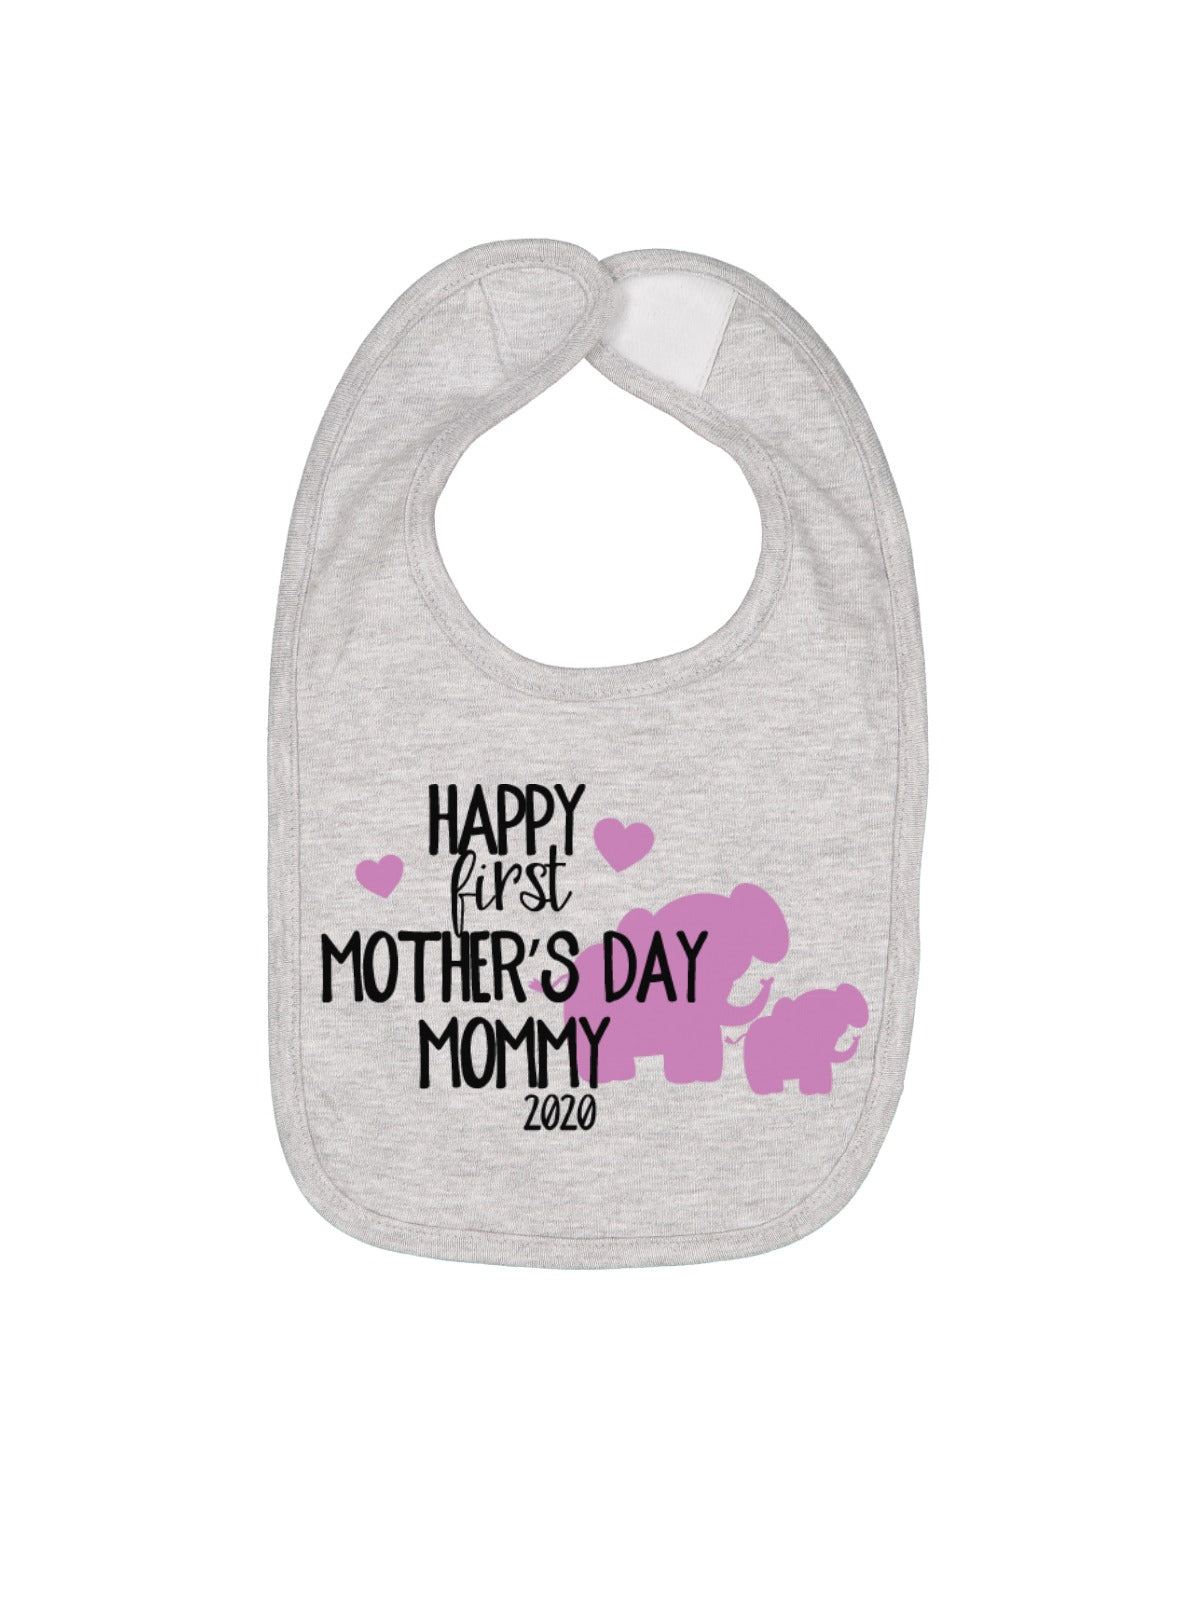 happy first mother's day mommy 2020 baby bib